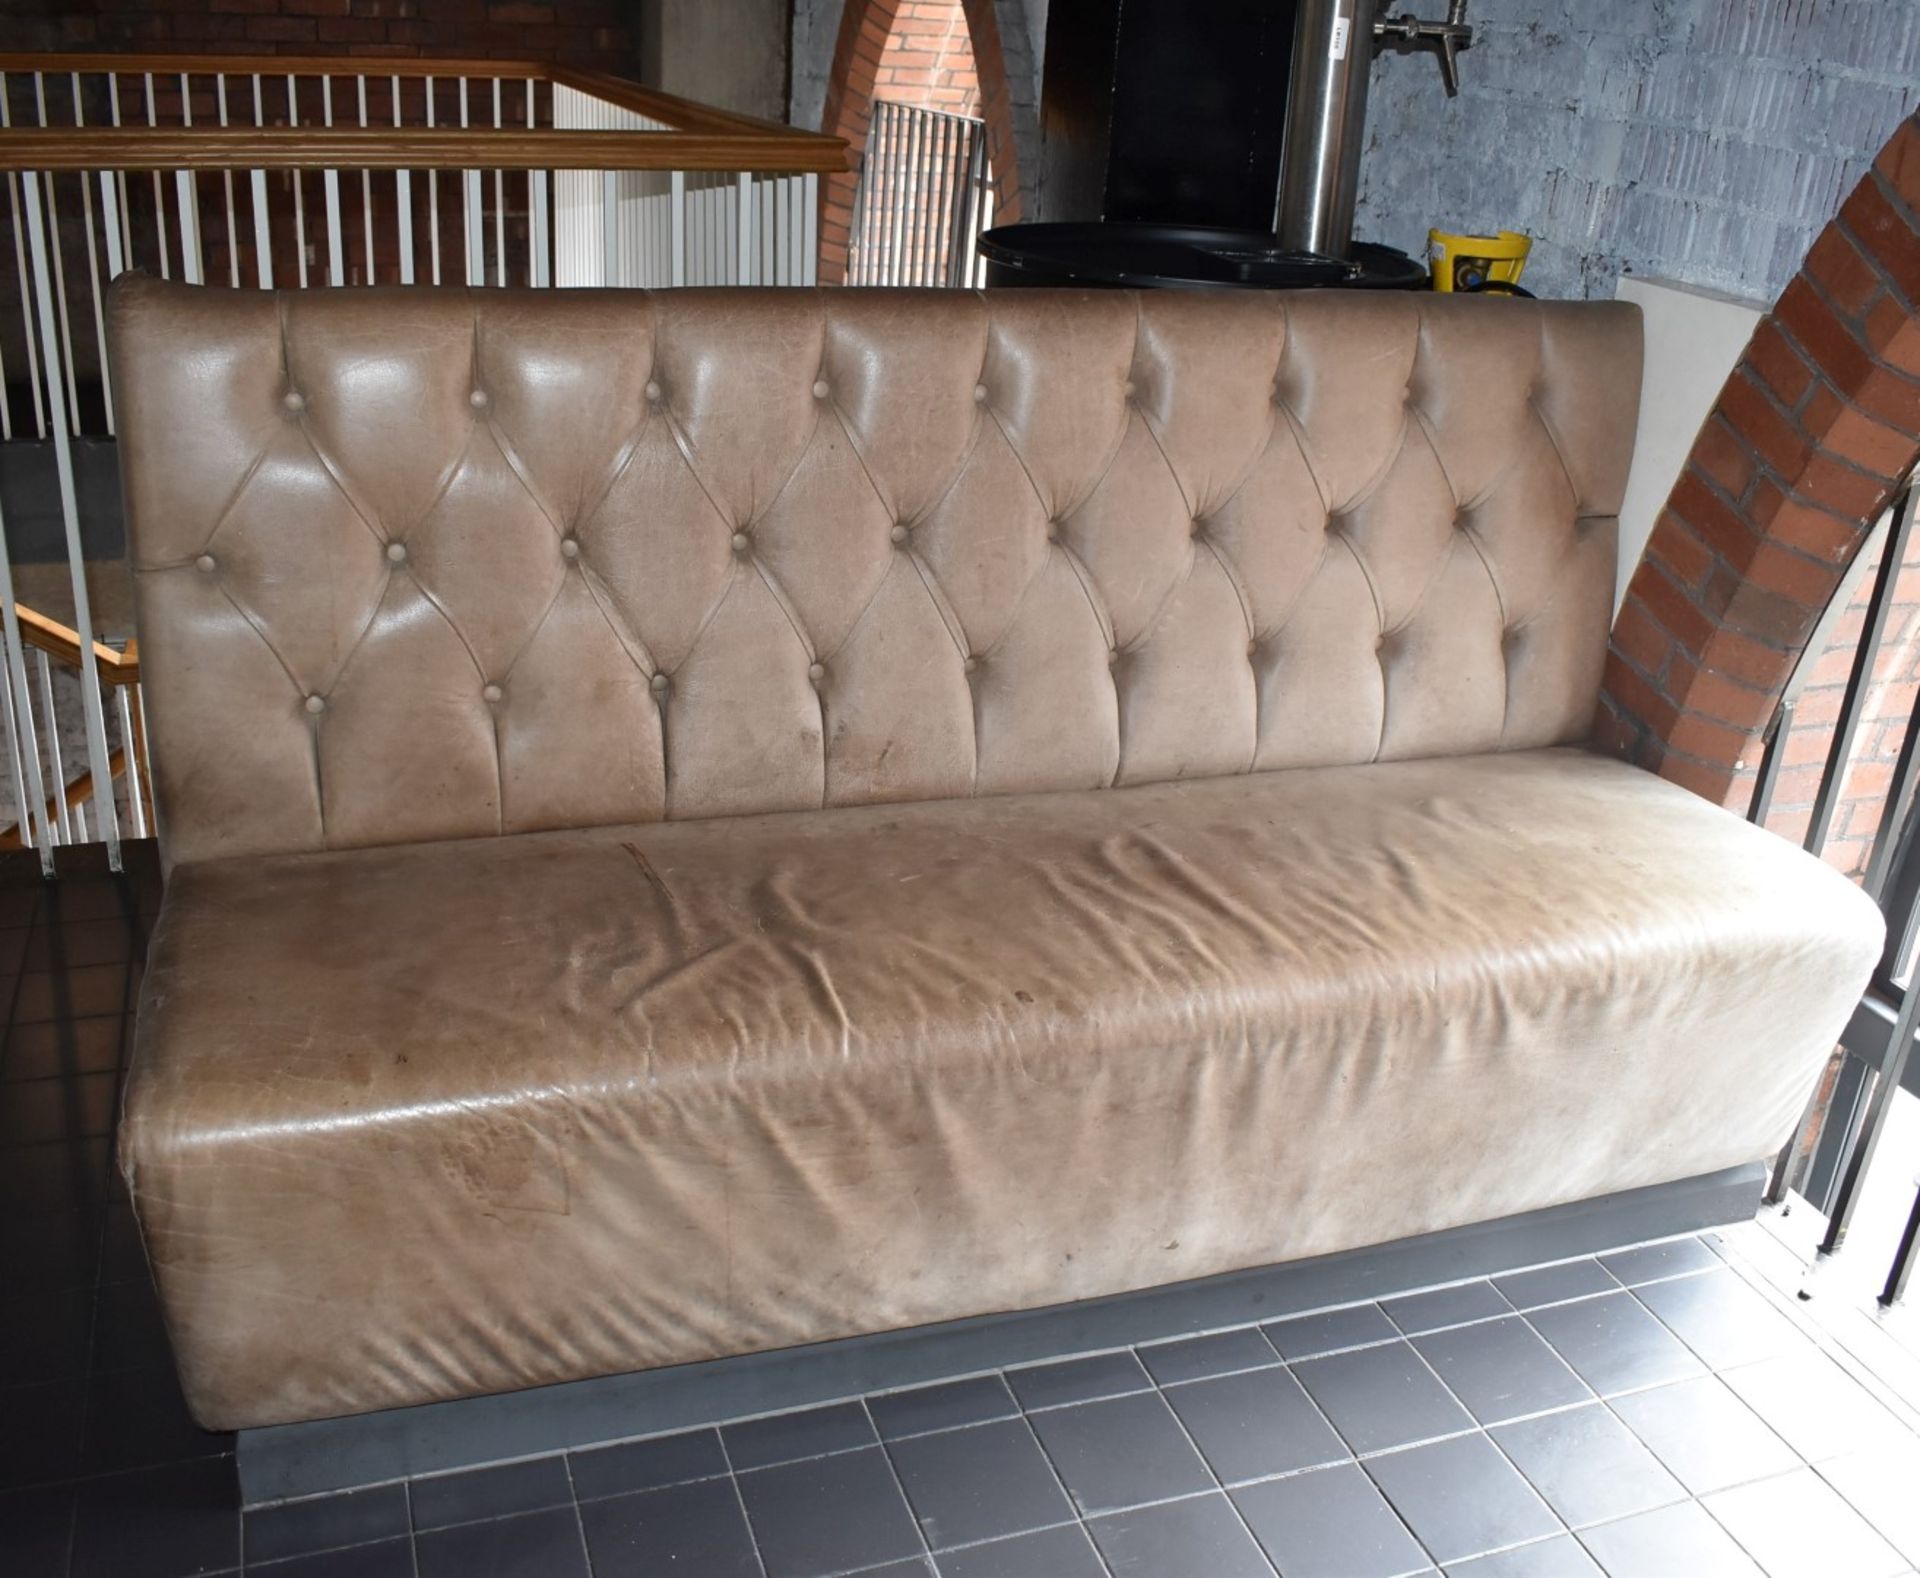 1 x Collection of Restaurant Seating Benches With Brown Leather Upholstery and Studded Backs - Image 13 of 26